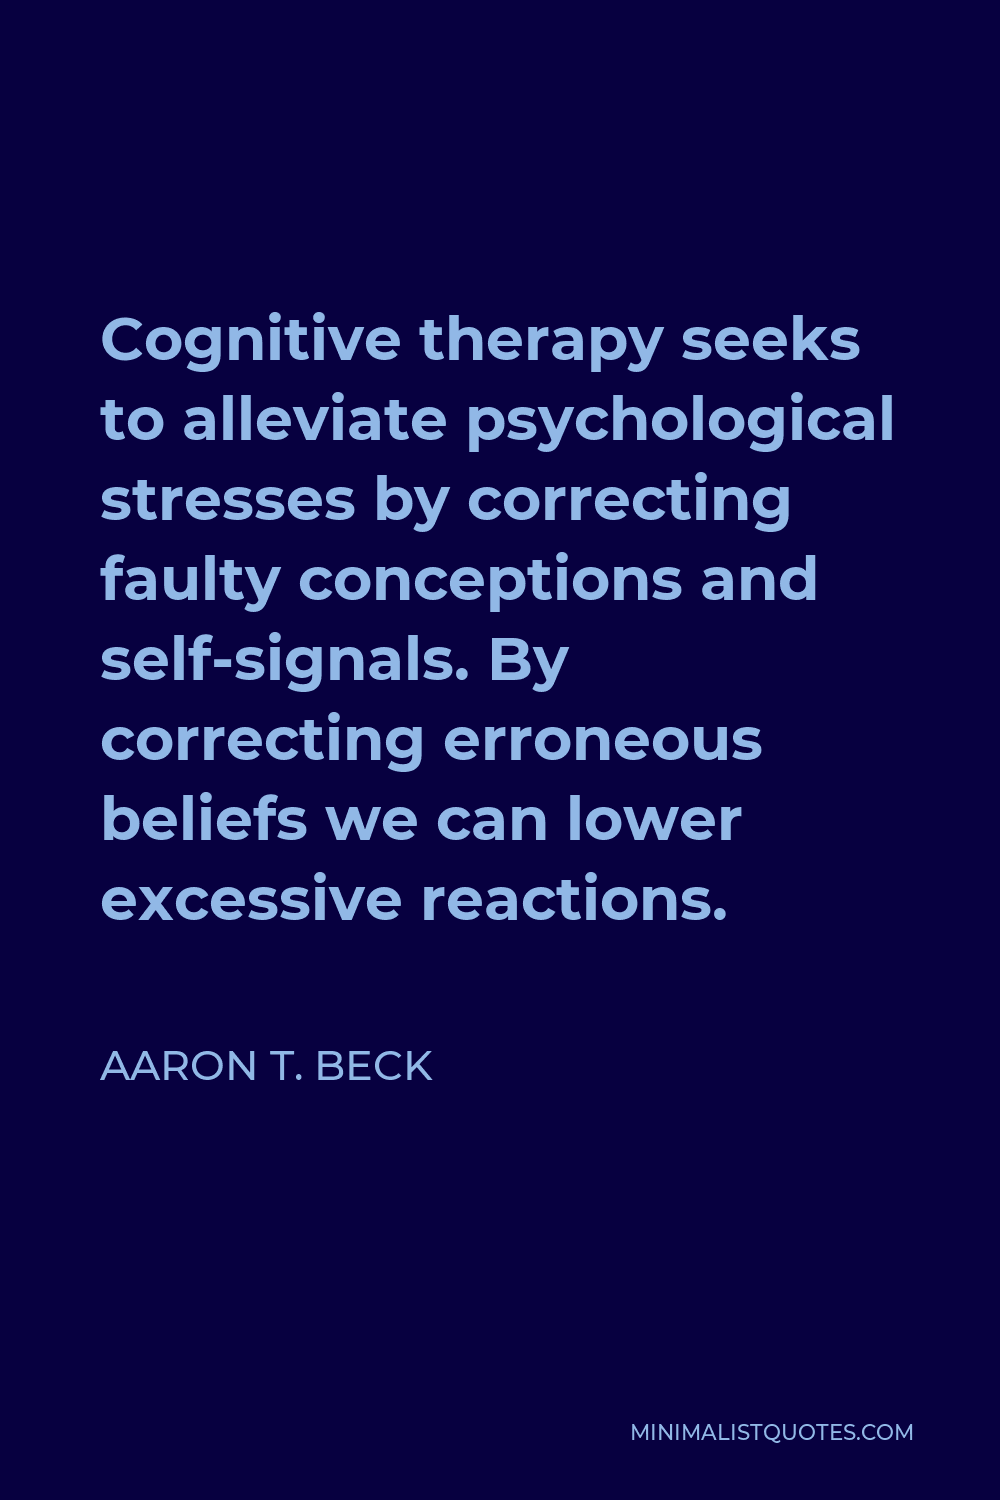 Aaron T. Beck Quote - Cognitive therapy seeks to alleviate psychological stresses by correcting faulty conceptions and self-signals. By correcting erroneous beliefs we can lower excessive reactions.